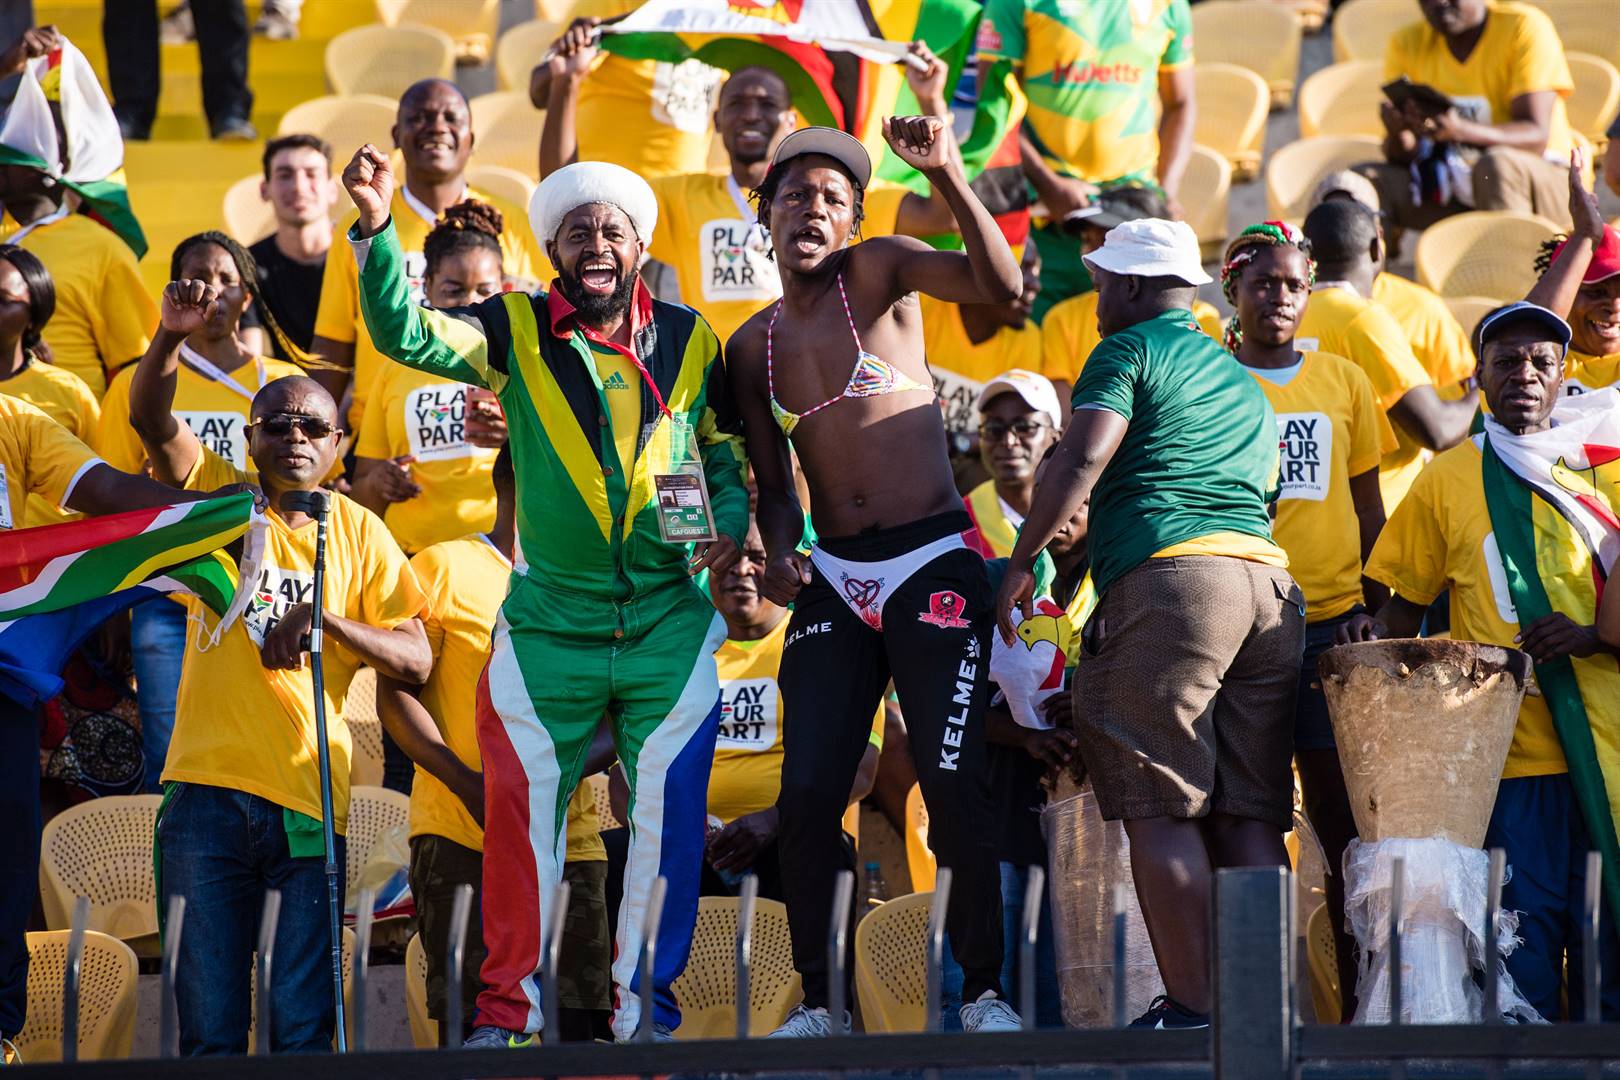 South African fans during the 2019 Africa Cup of Nations Group D match between Cote d’Ivoire and South Africa at Al-Salam Stadium on Monday (June 24 2019) in Cairo, Egypt. Picture: Sebastian Frej/MB Media/Getty Images